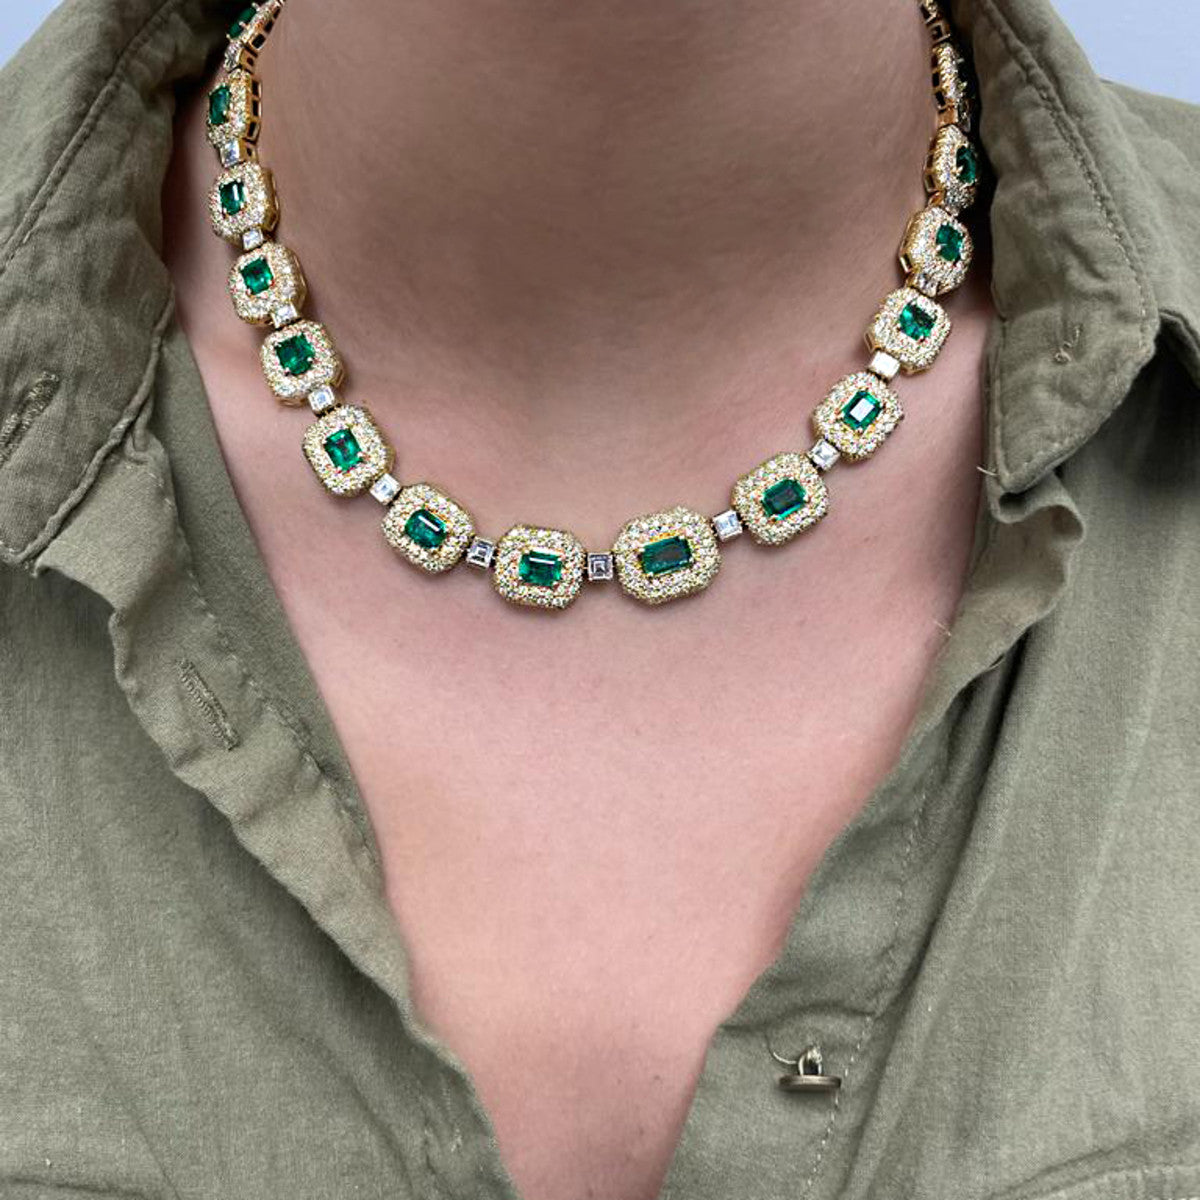 Post-1980s 14KT Yellow Gold Emerald & Diamond Necklace worn on neck